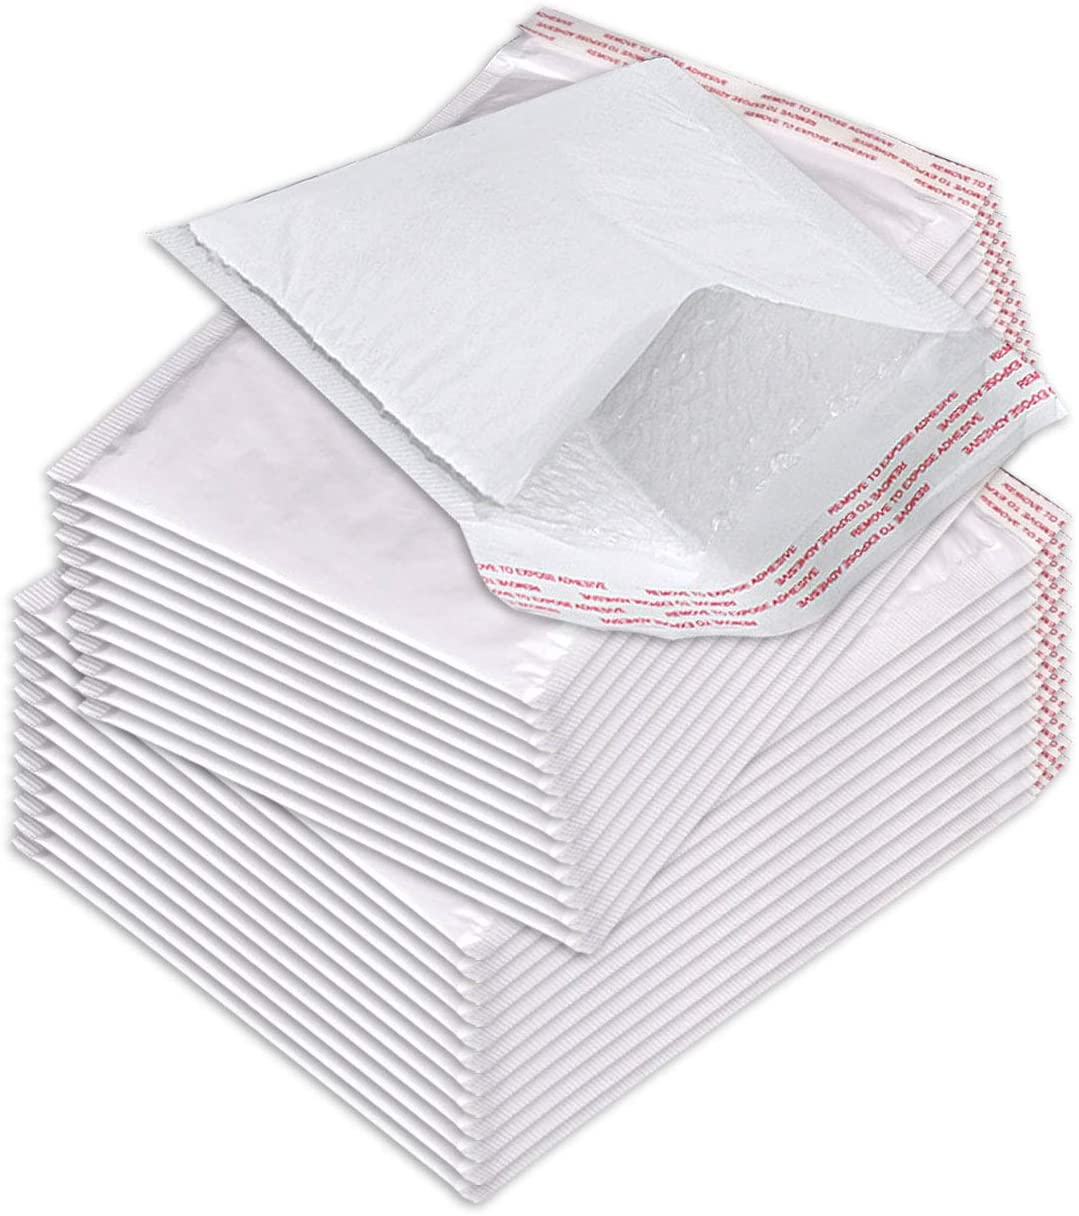 250#0 6x10 Hardshell Poly Bubble Mailers TUFF Bubble Self Sealing Premium Padded Envelopes by Secure Seal 6x10